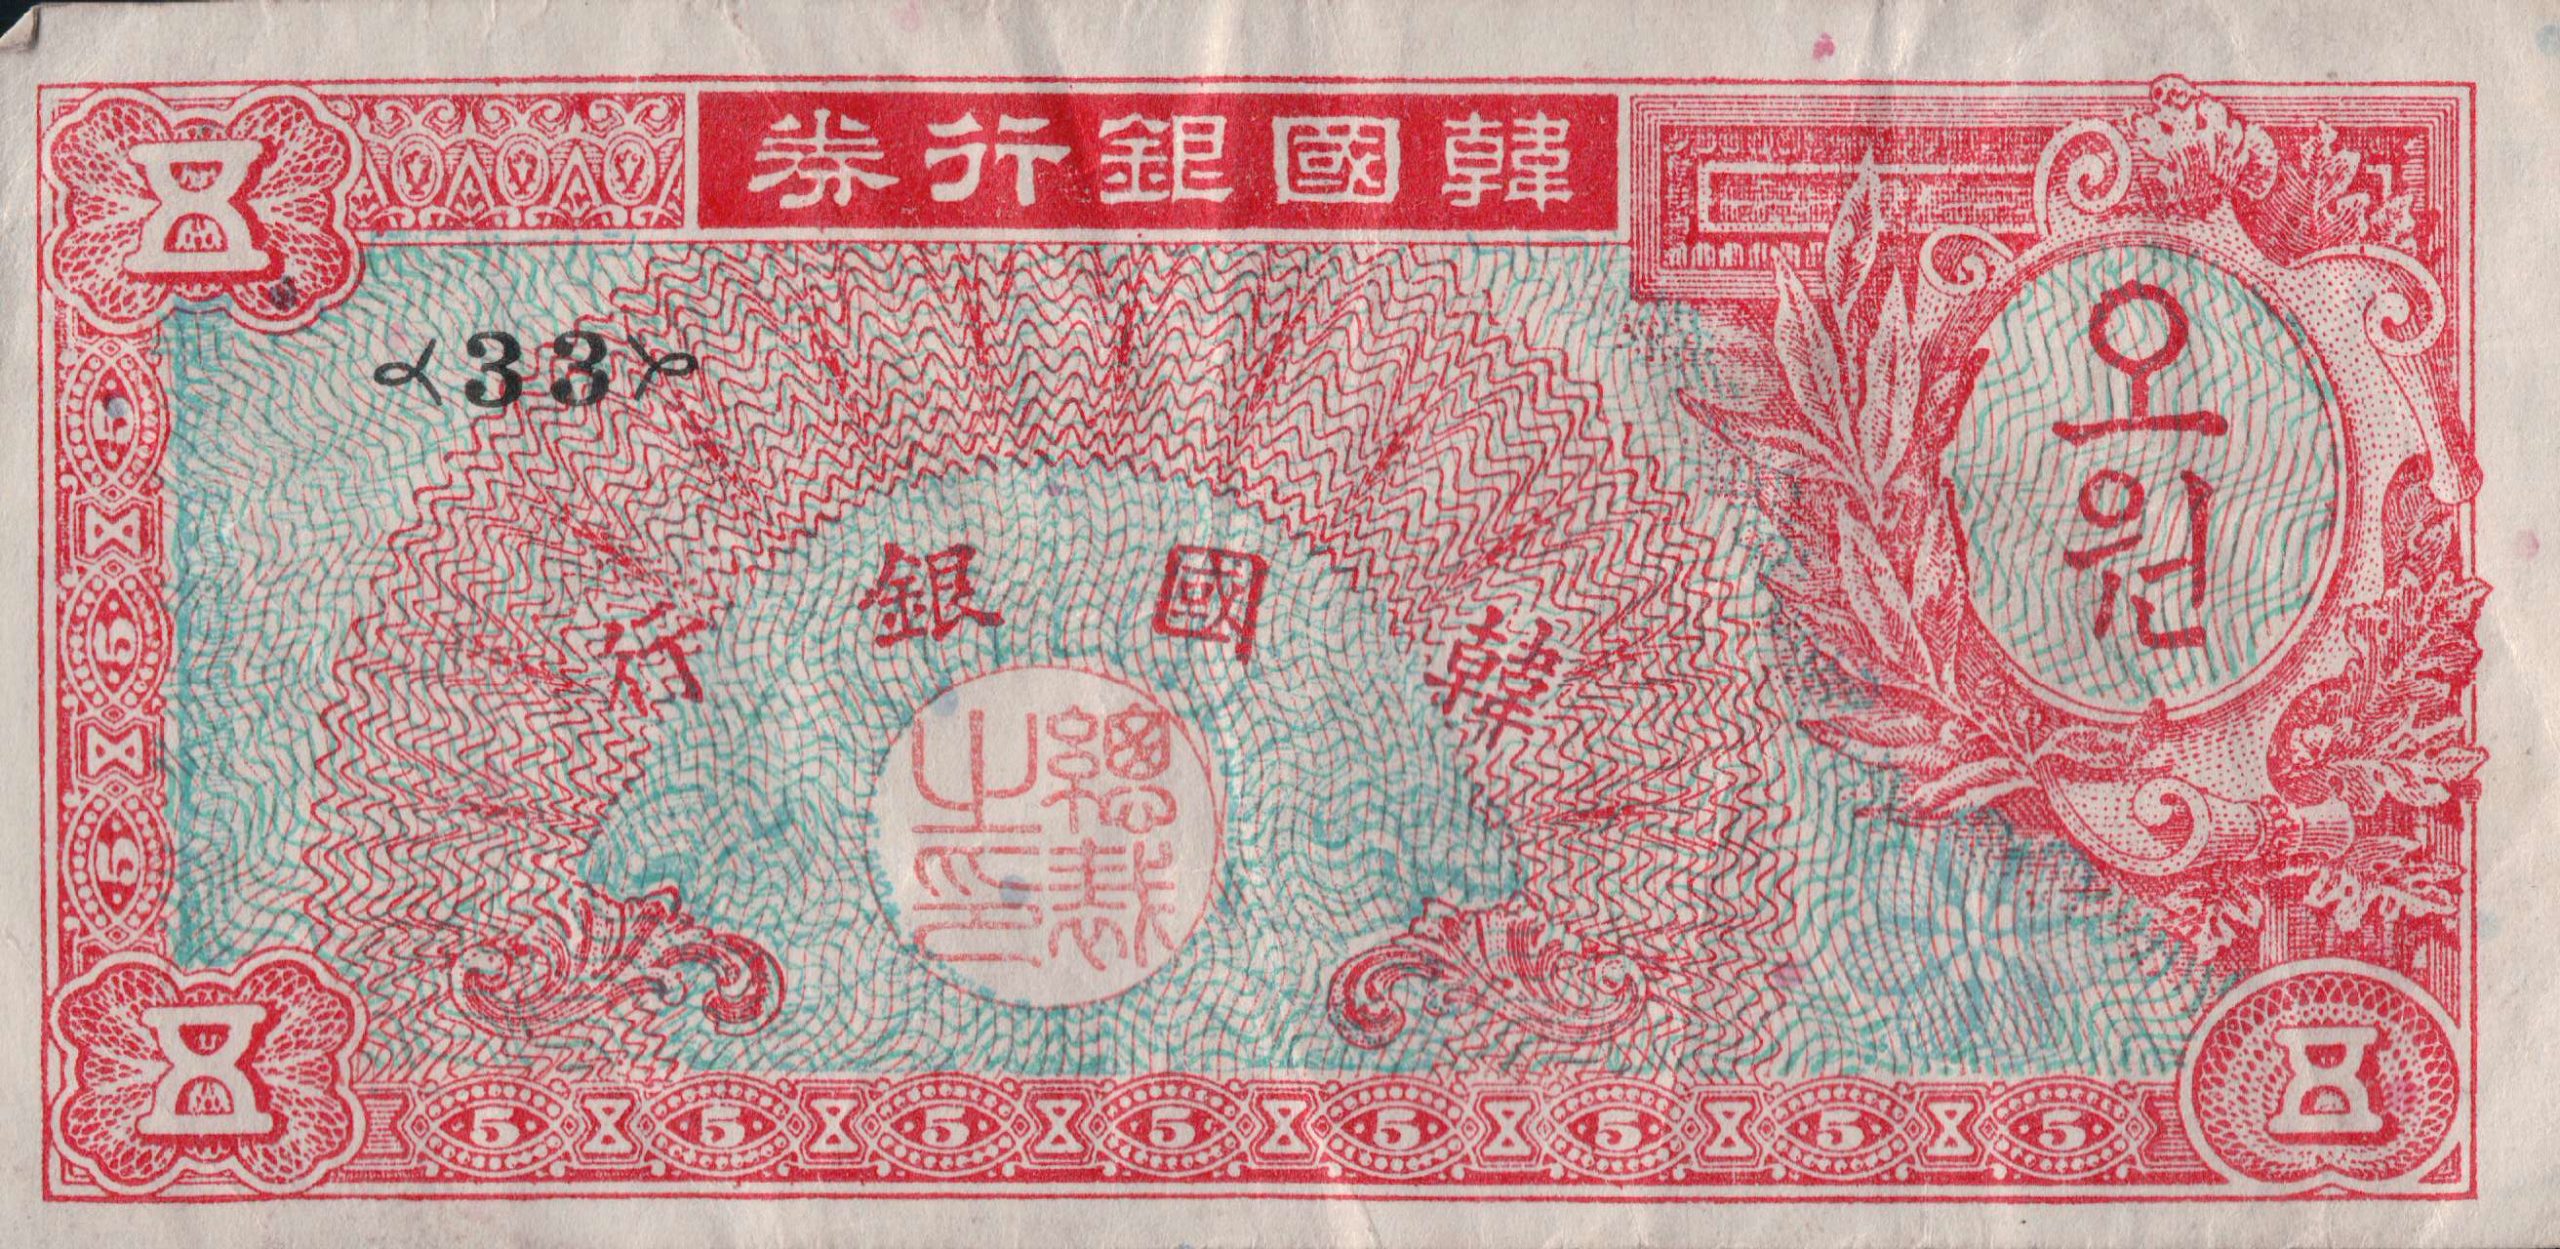 South Korean currency